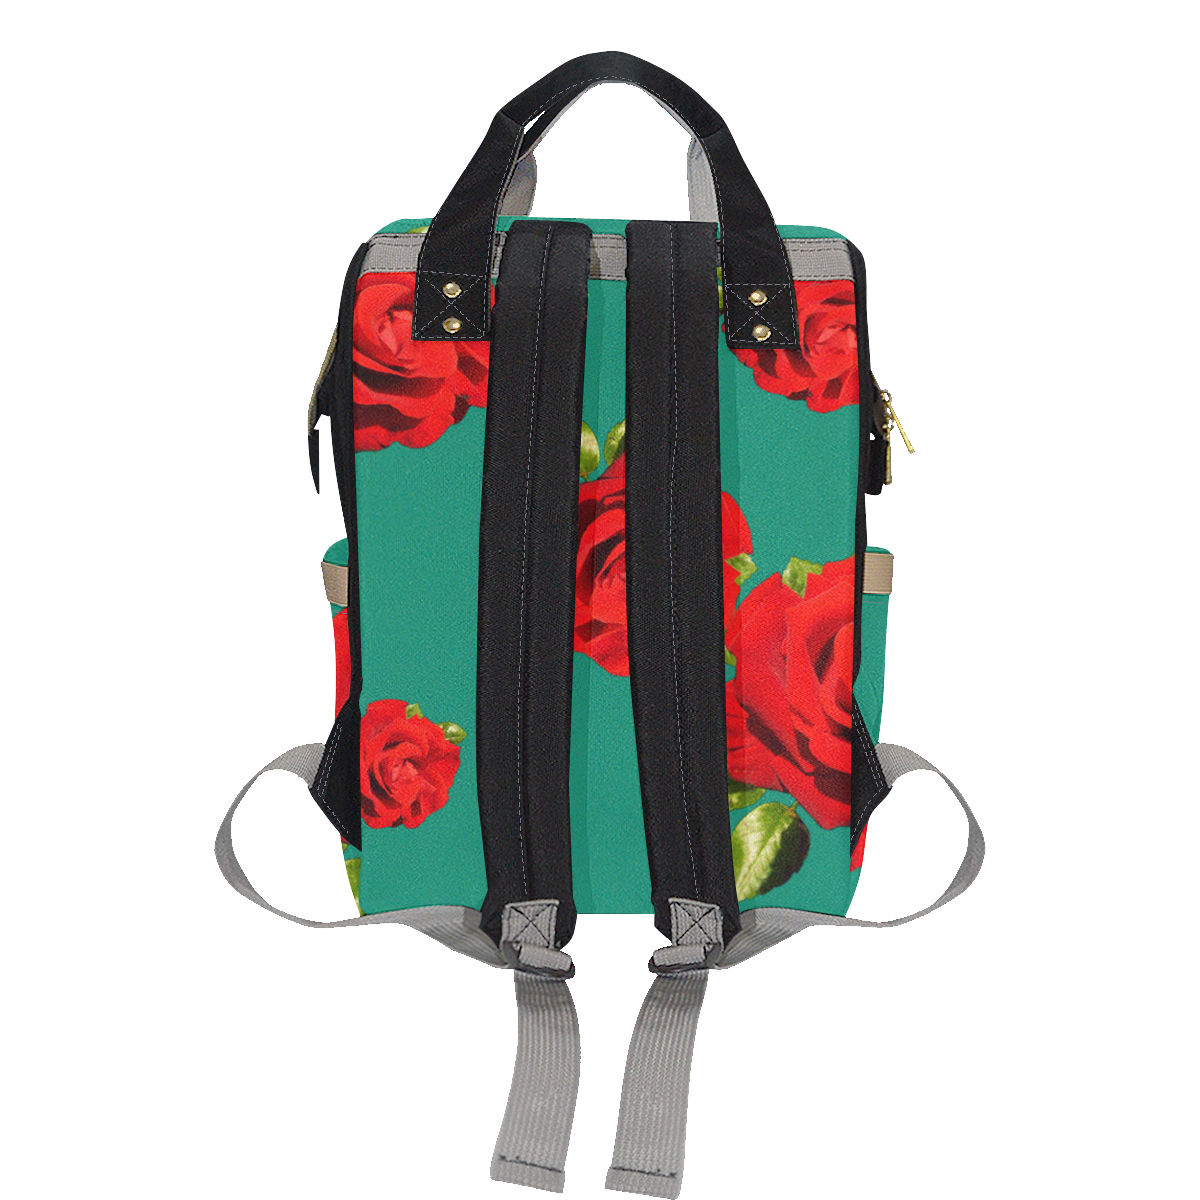 Fairlings Delight's Floral Luxury Collection- Red Rose Multi-Function Diaper Backpack 53086c17 Multi-Function Diaper Backpack/Diaper Bag (Model 1688)